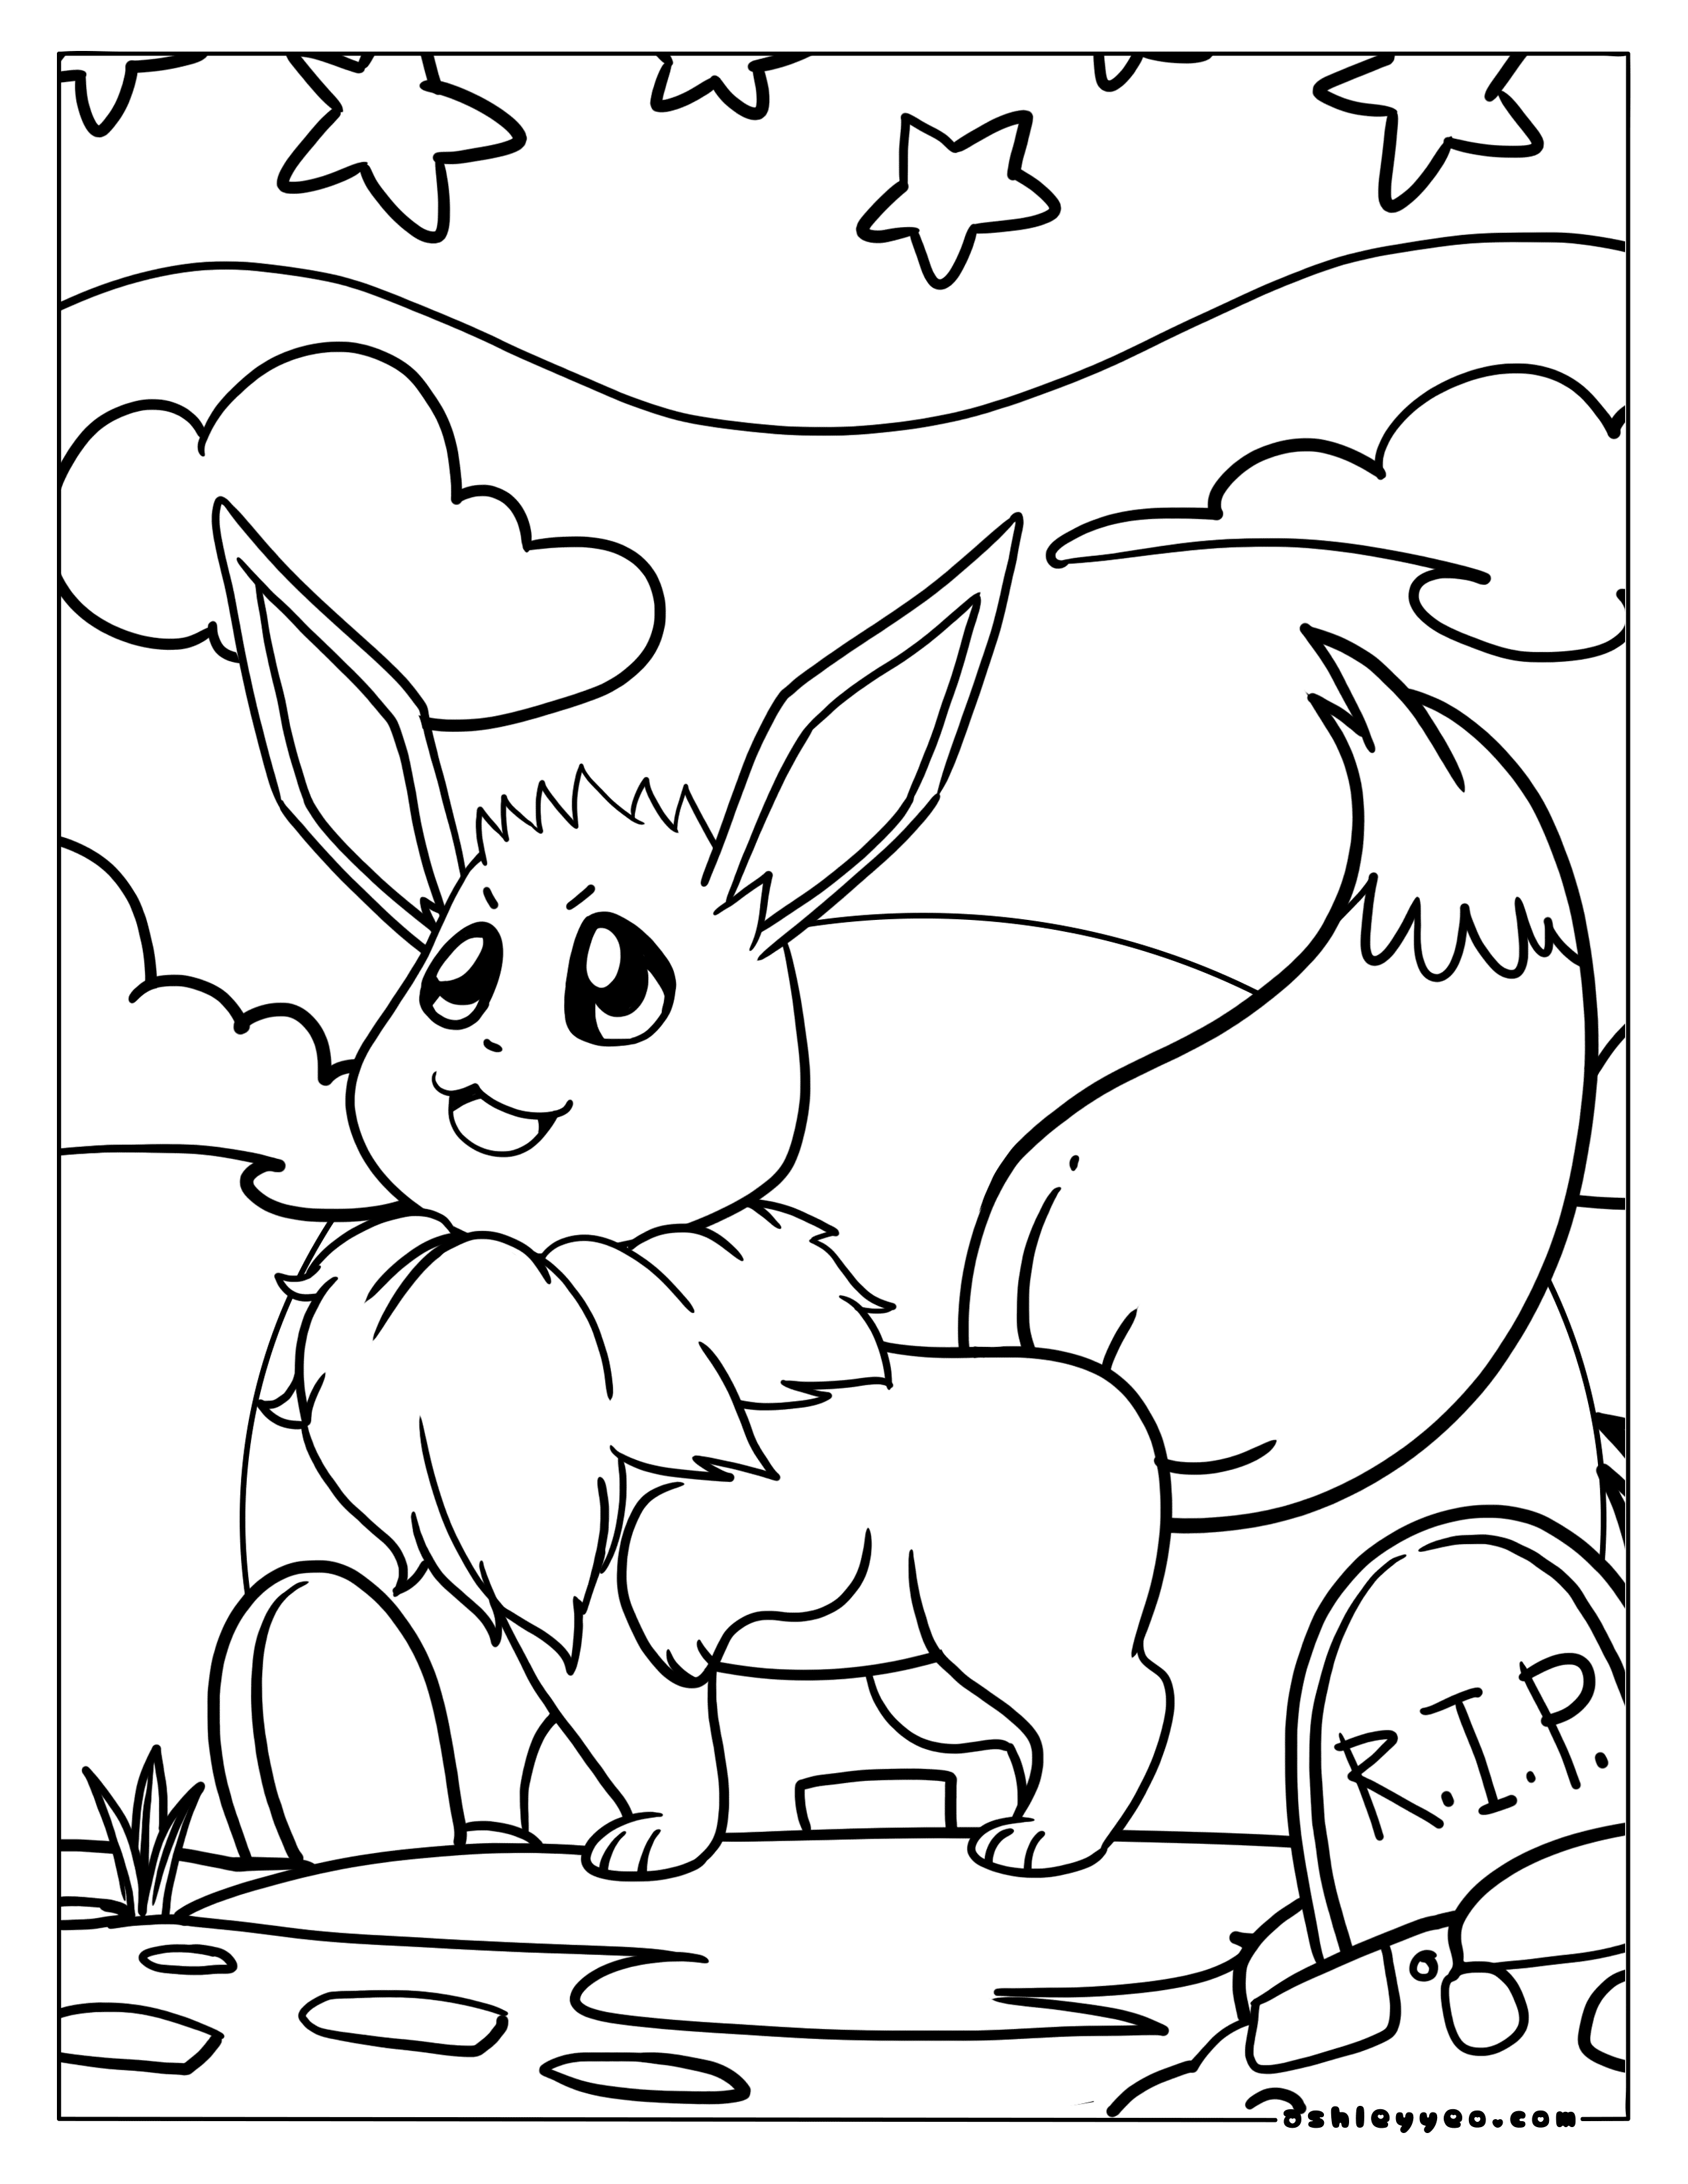 200 Eevee Coloring Pages: Evolve Your Art Skills 145